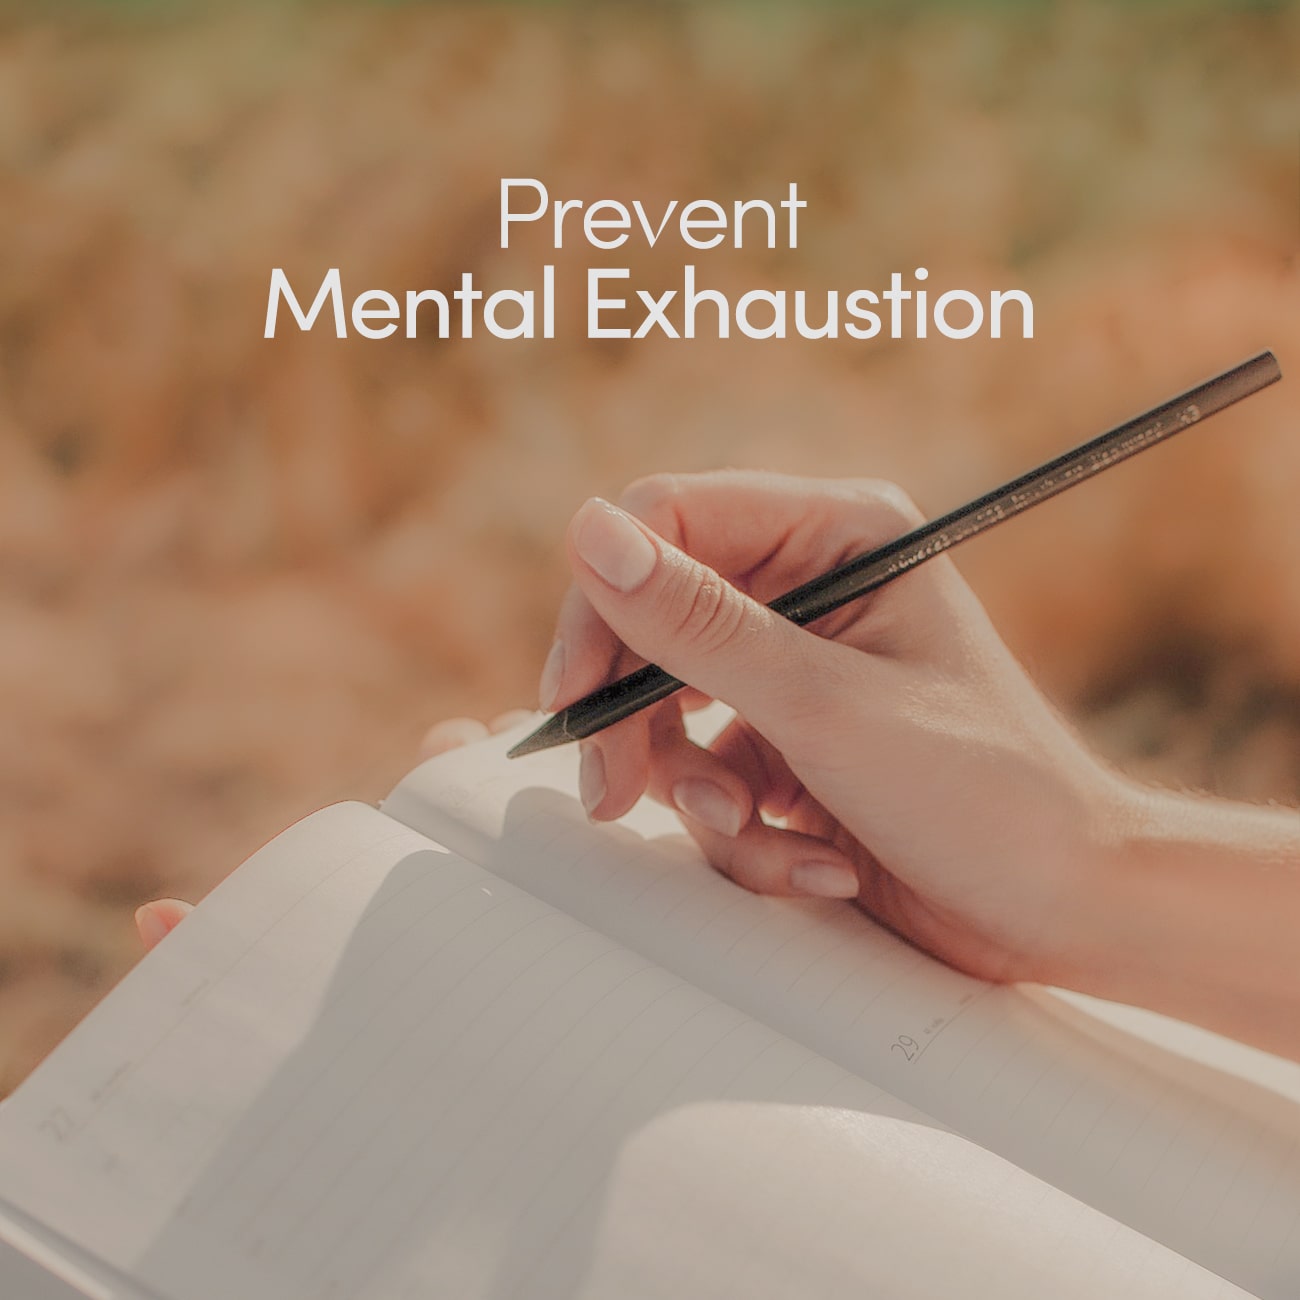 How to Prevent Mental Exhaustion